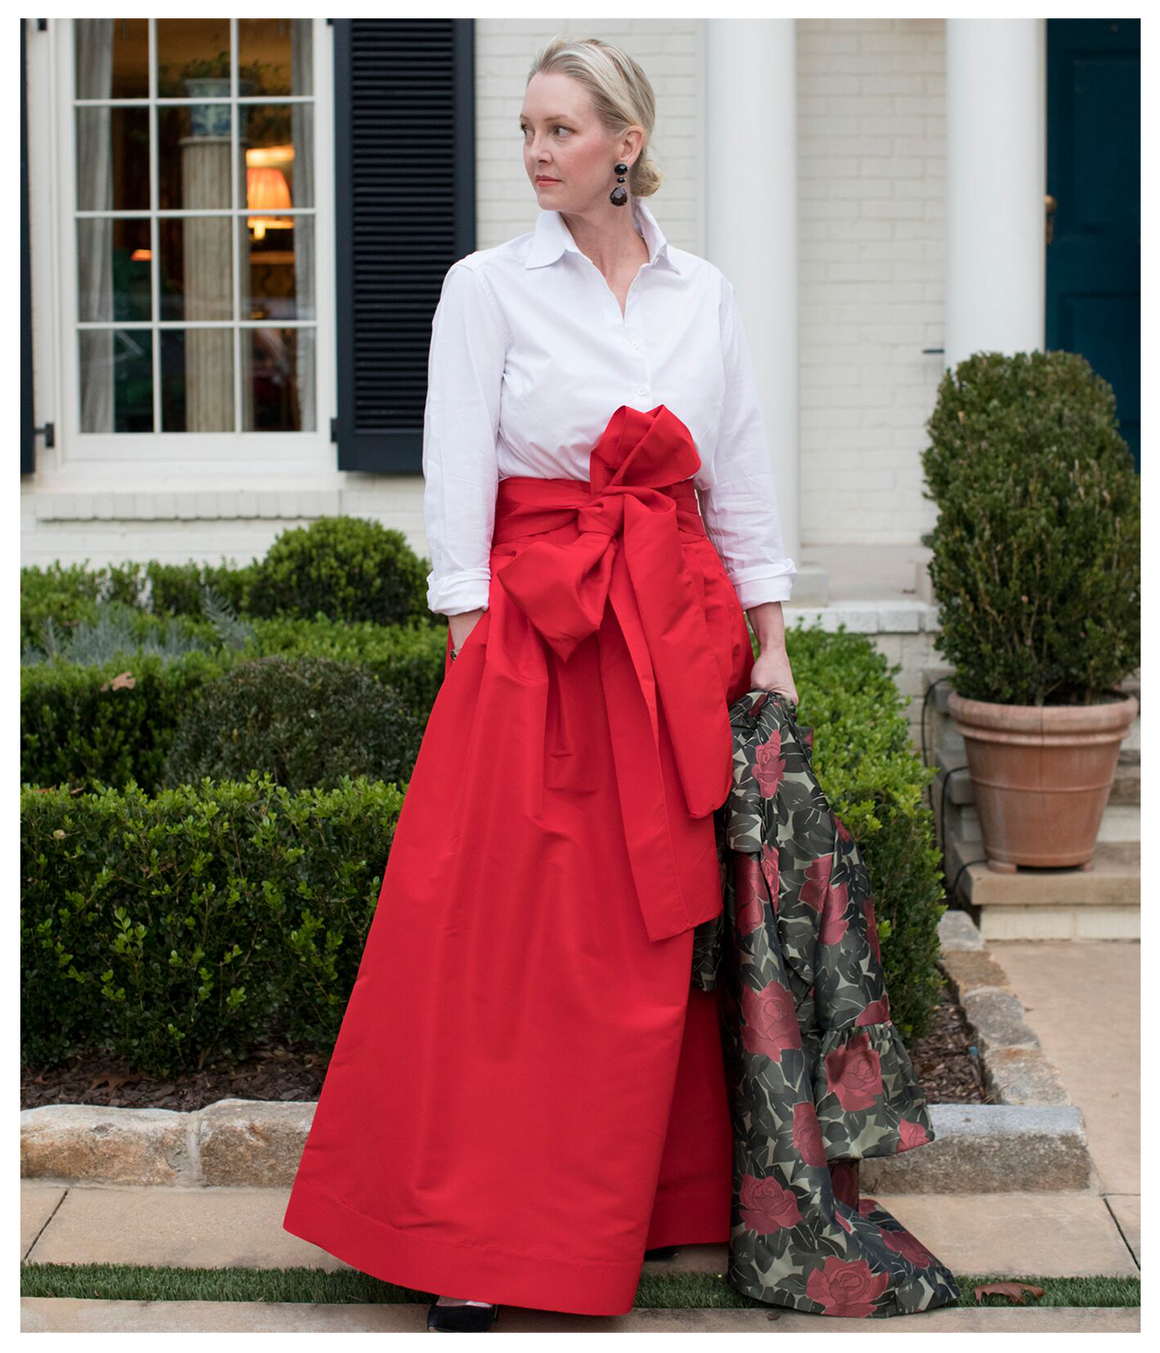 Taffeta Shirt Gown With White Top and Bright Color Skirt – Terijon.com